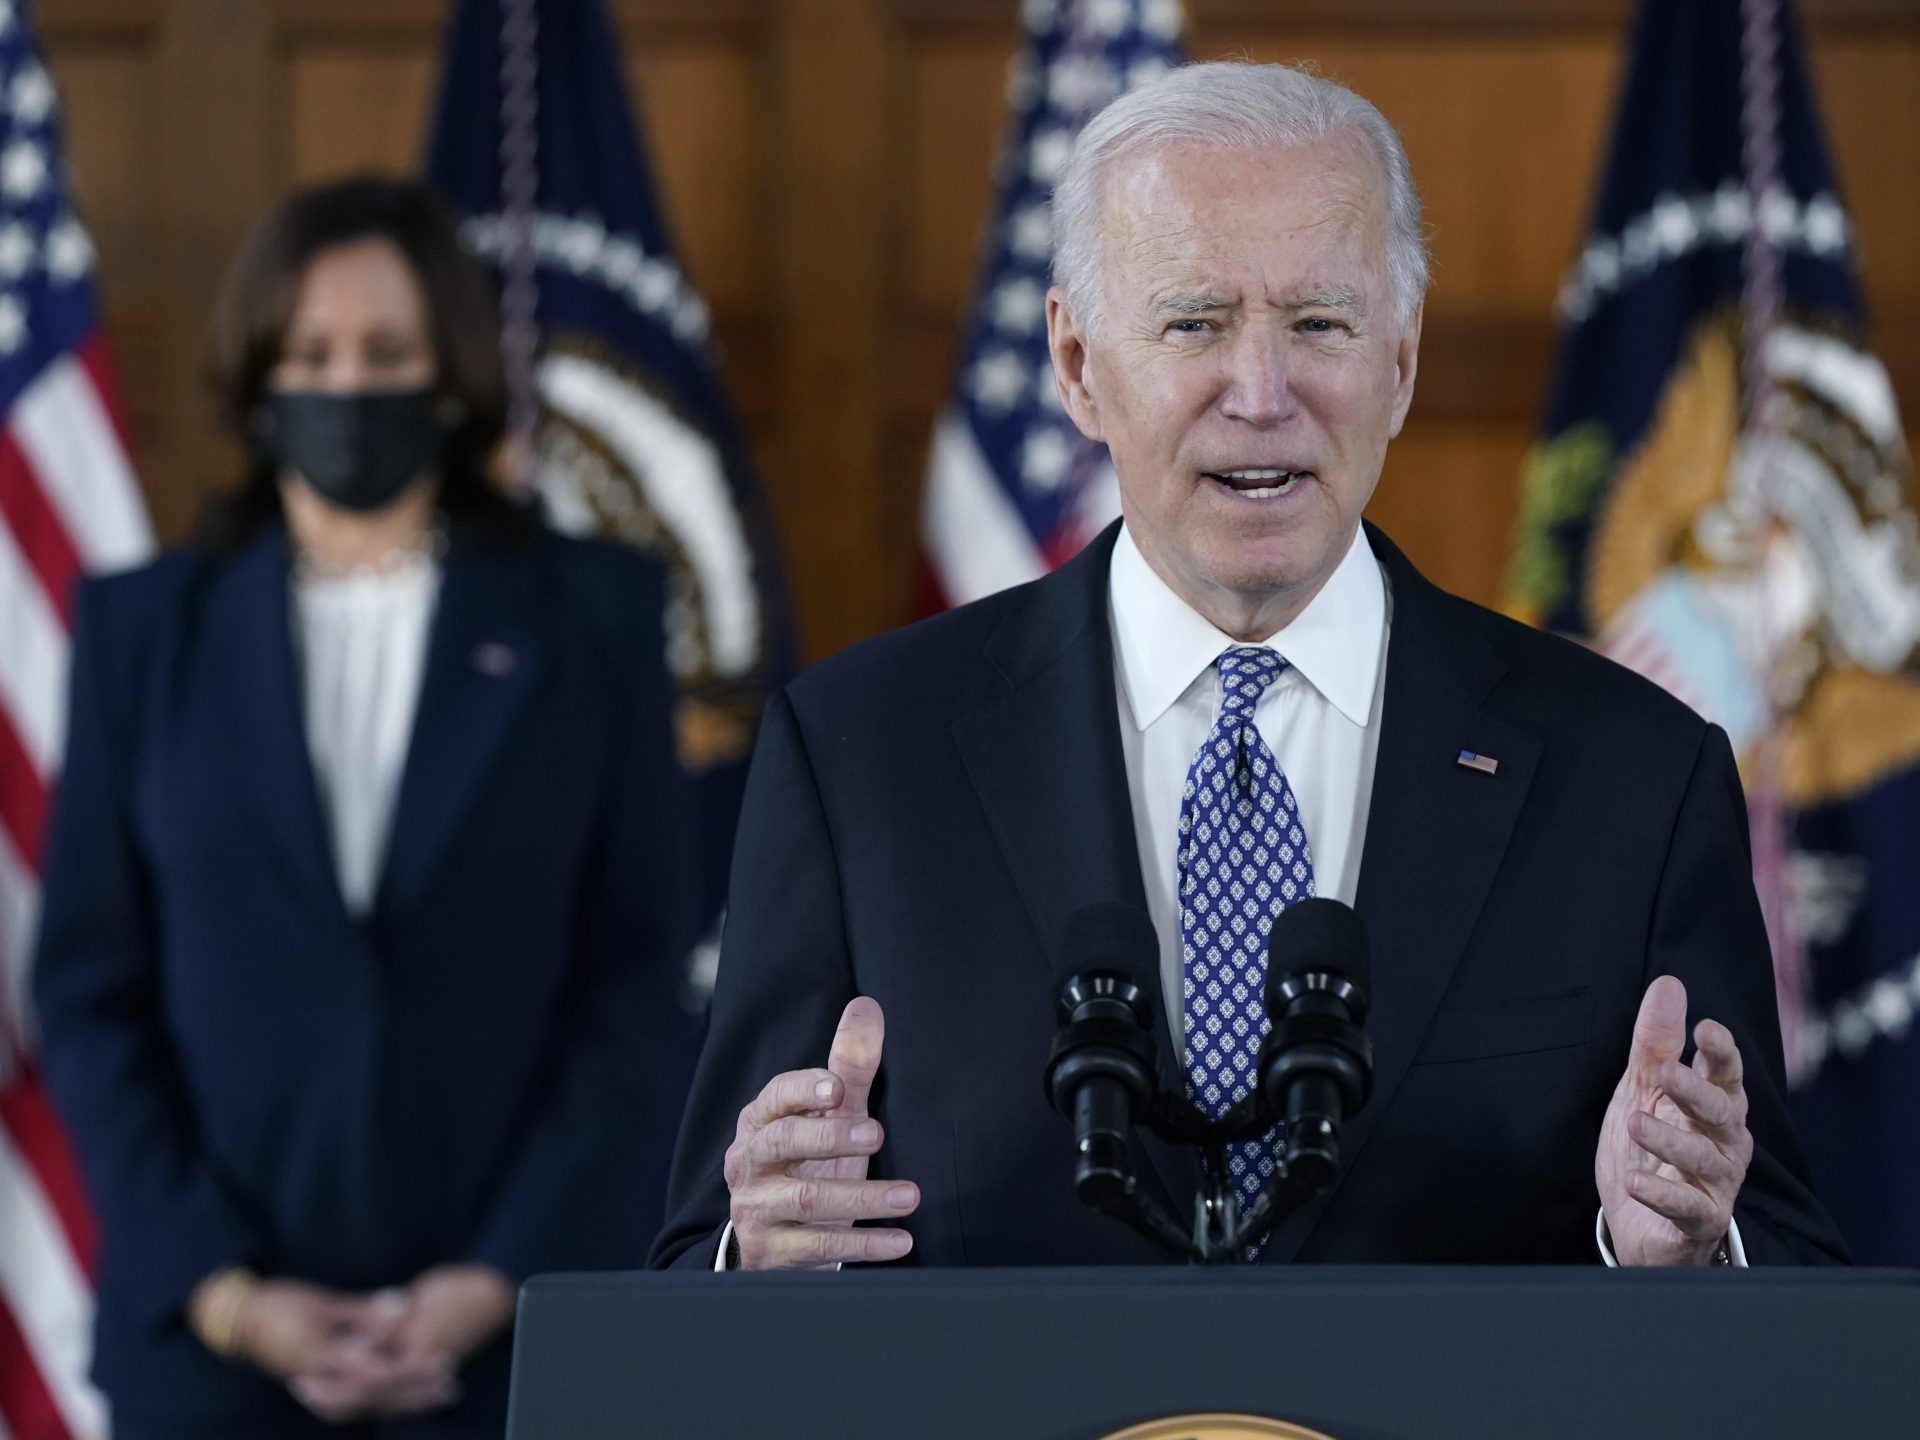 President Biden and Vice President Harris appear in Atlanta after meeting with leaders from Georgia's Asian-American and Pacific Islander community on Friday, March 19, 2021.